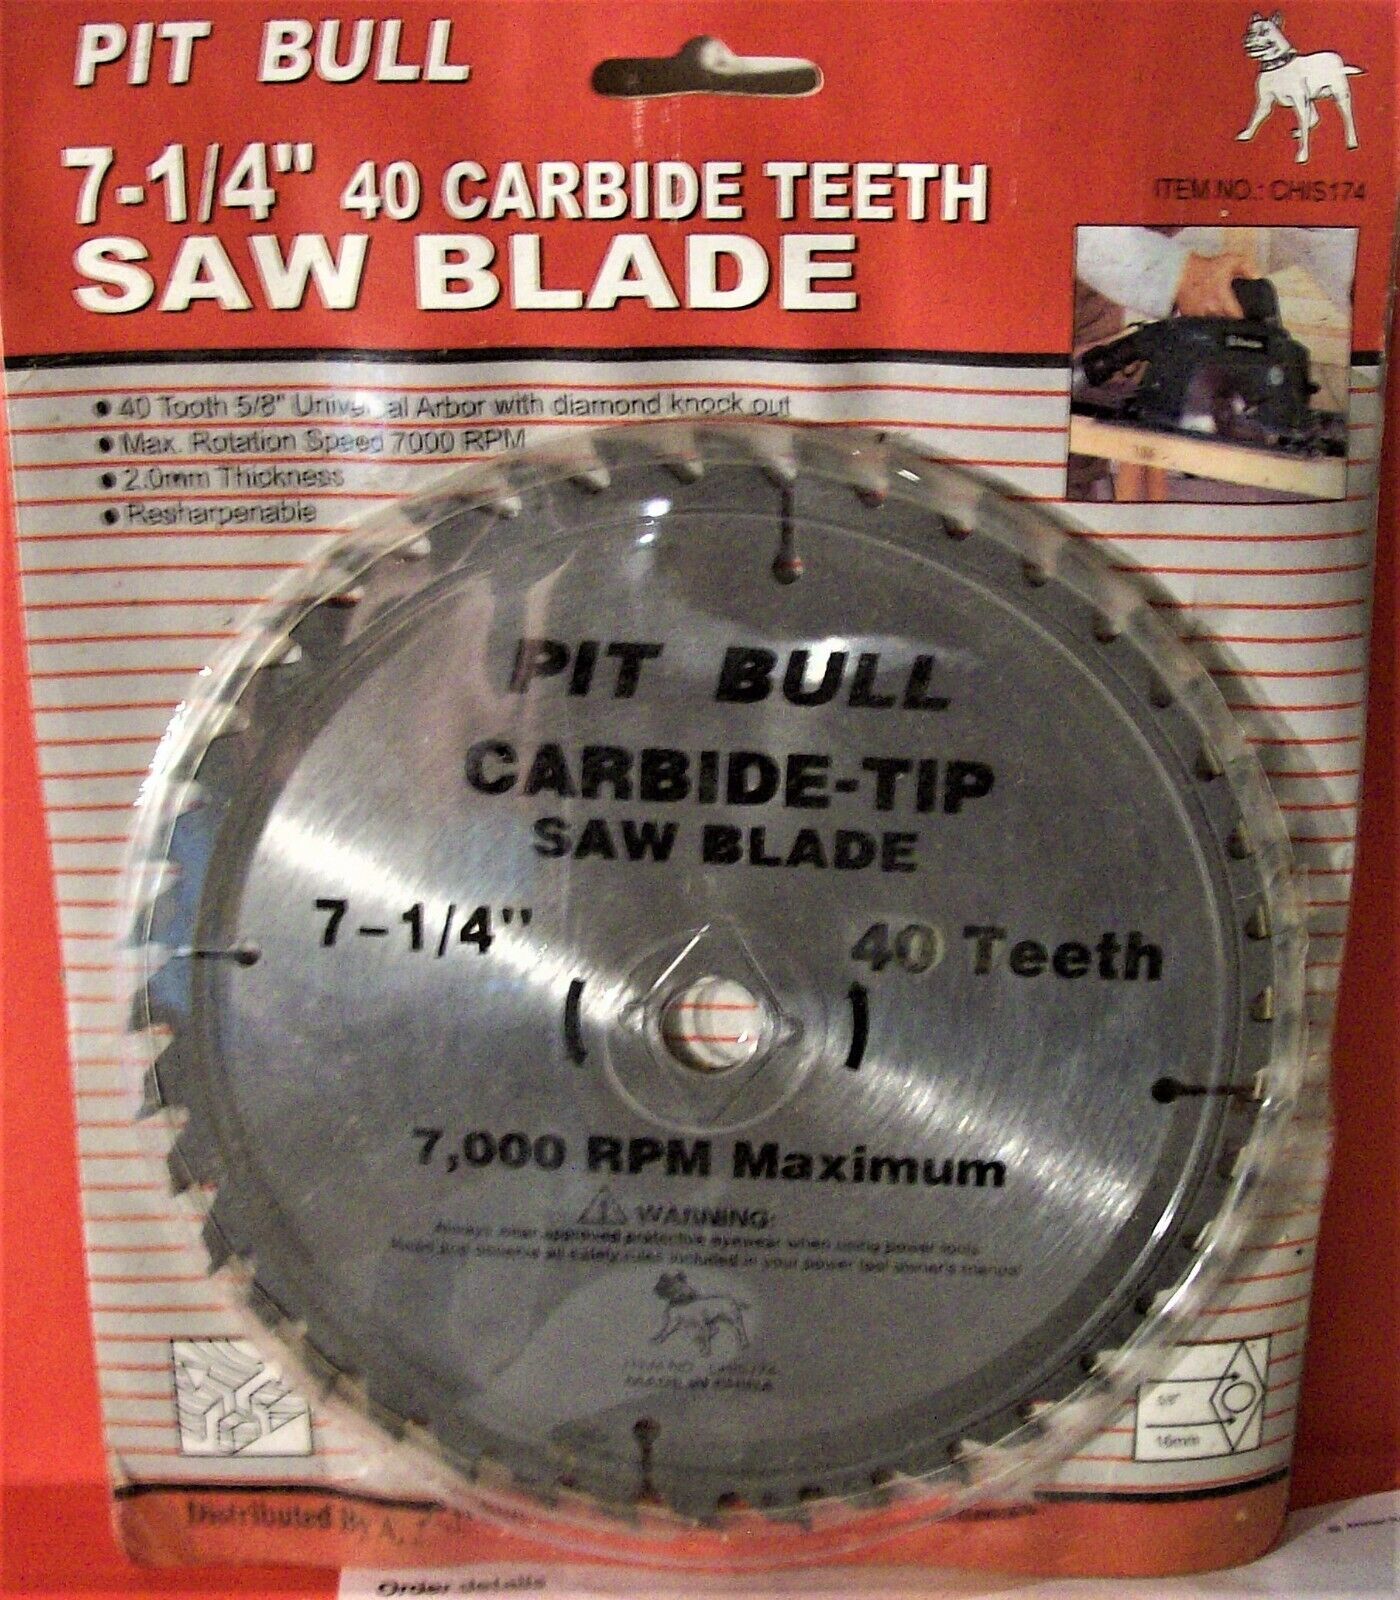 NEW 7-1/4" 40 TOOTH 5/8" CARBIDE TIPPED CIRCULAR SAW BLADE RESHARPABLE PIT BULL - $14.50